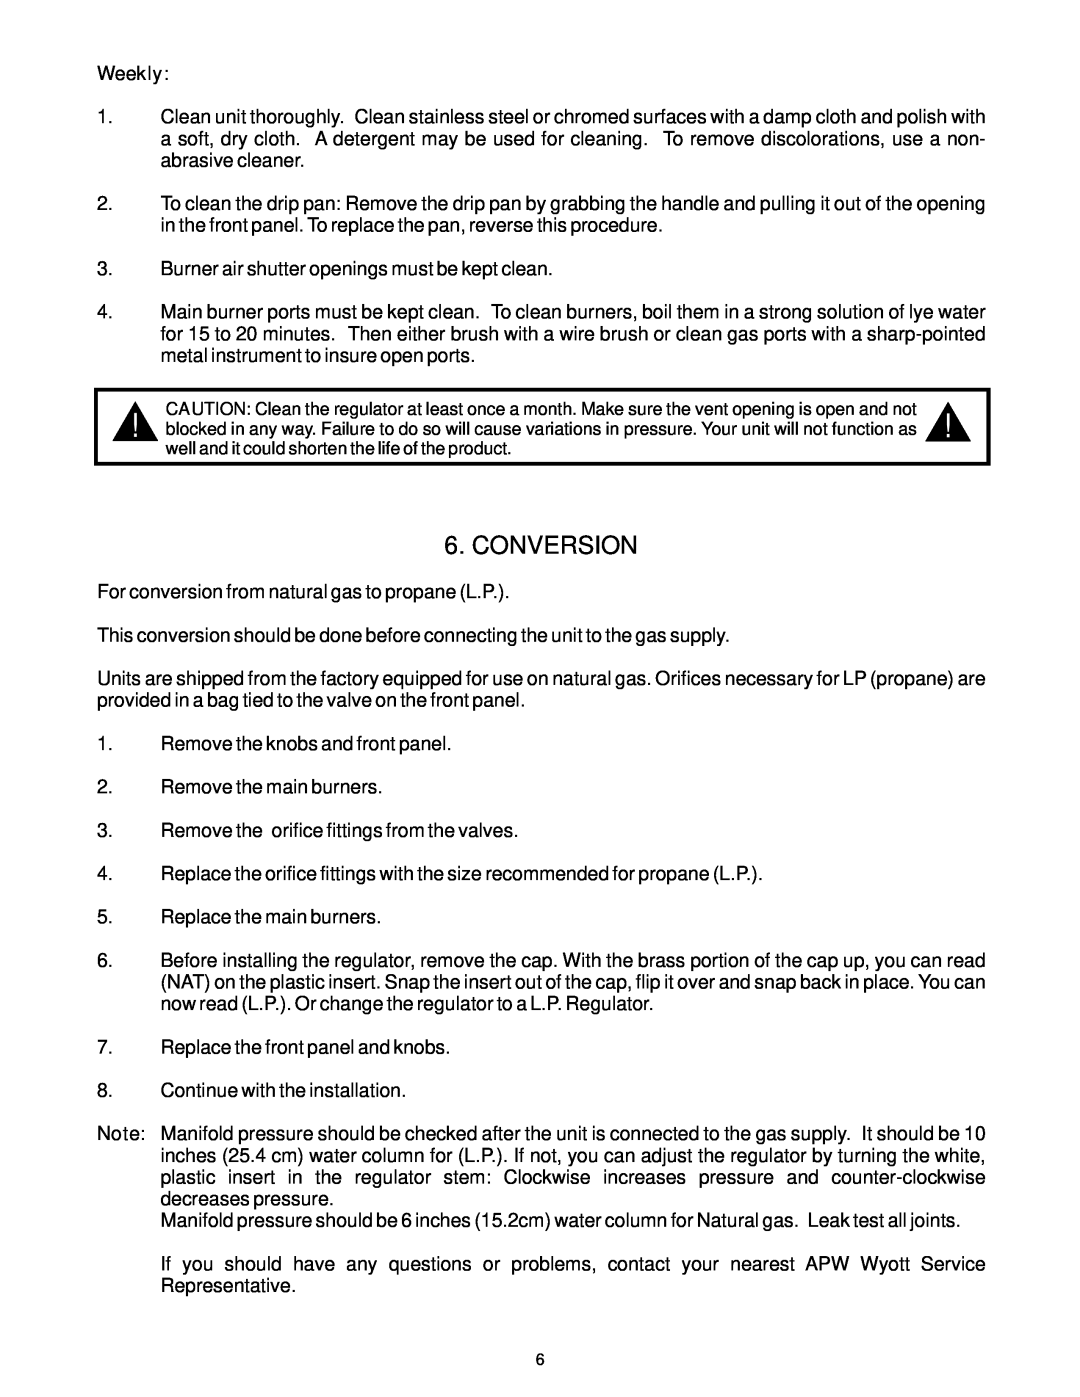 APW Wyott GHP-2H operating instructions Conversion, Weekly 